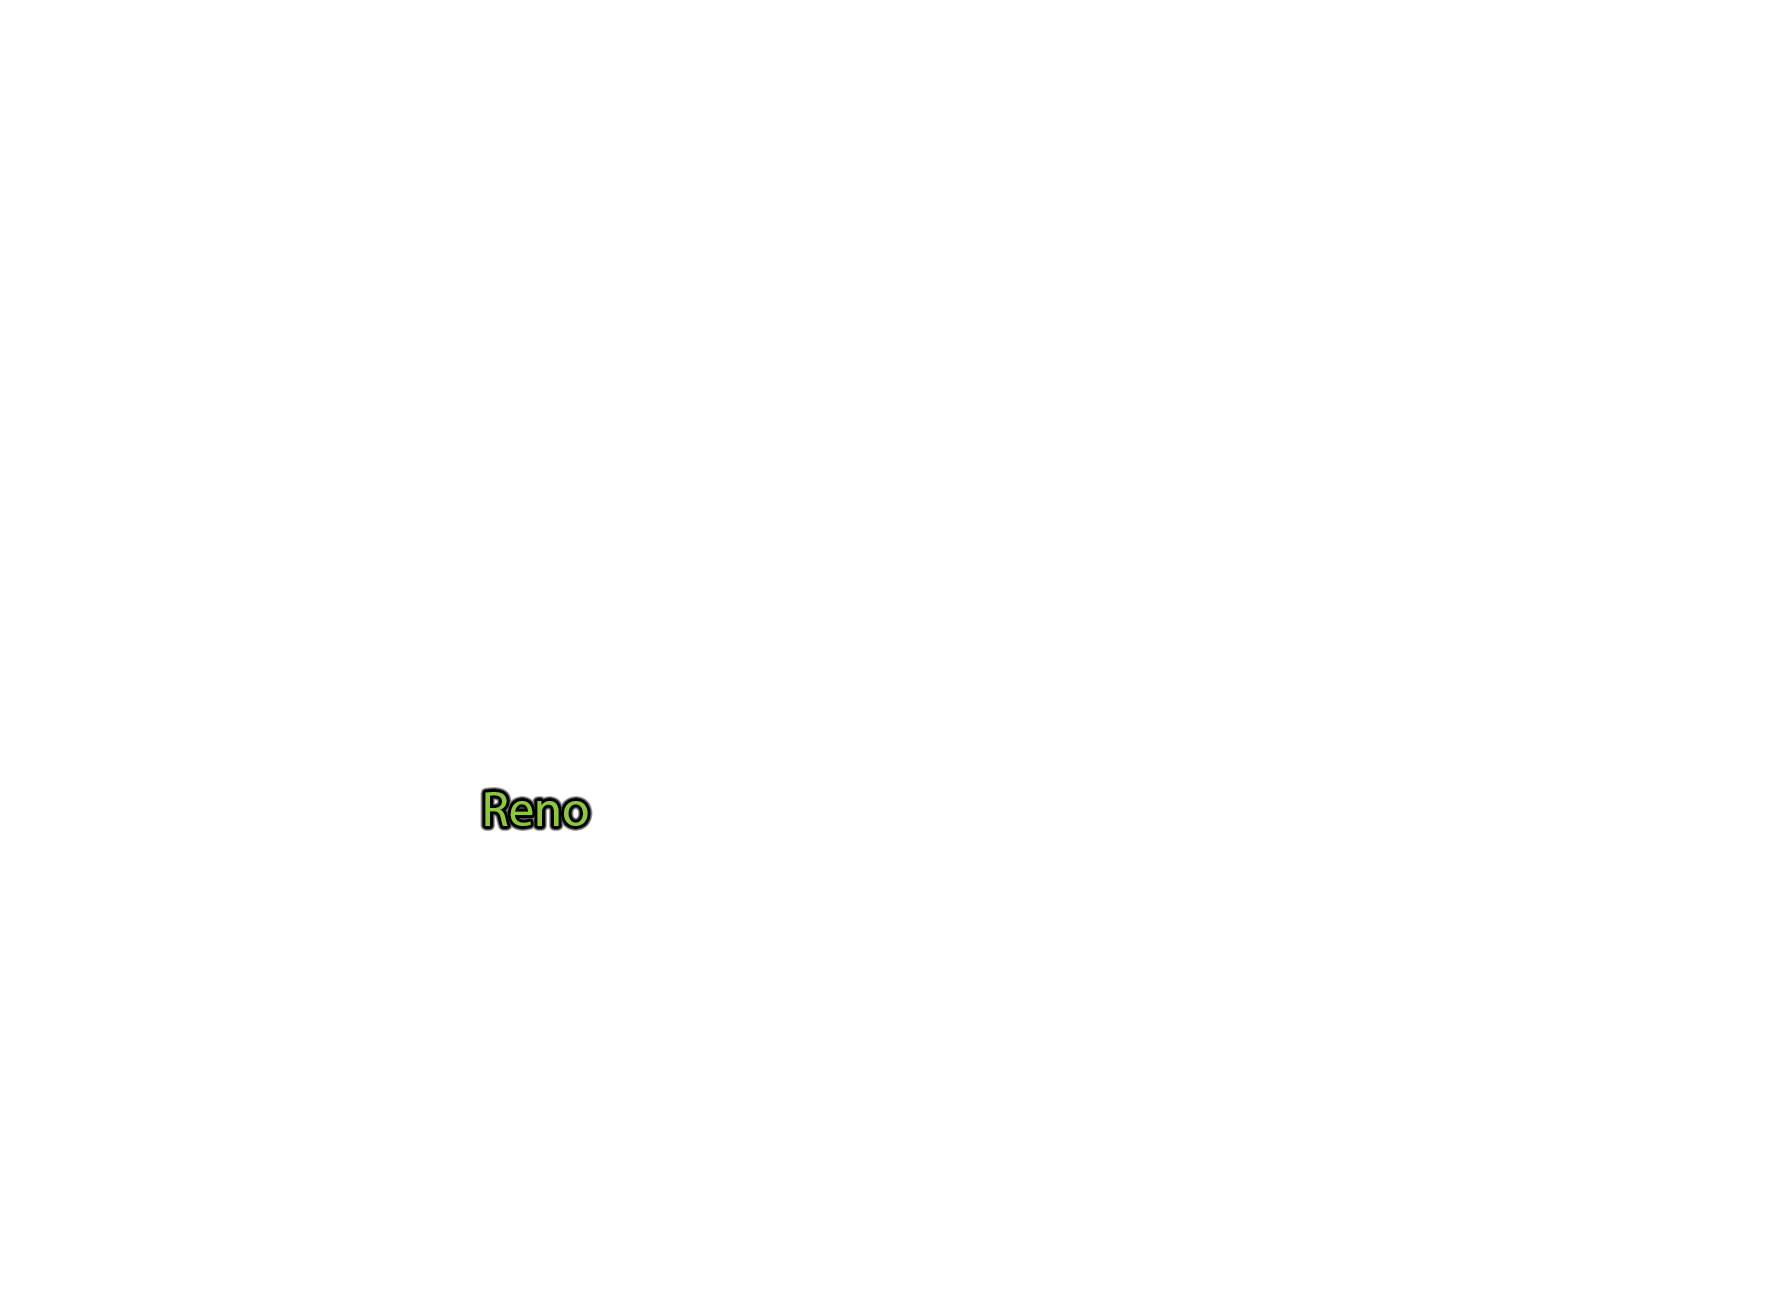 Reno label with glow